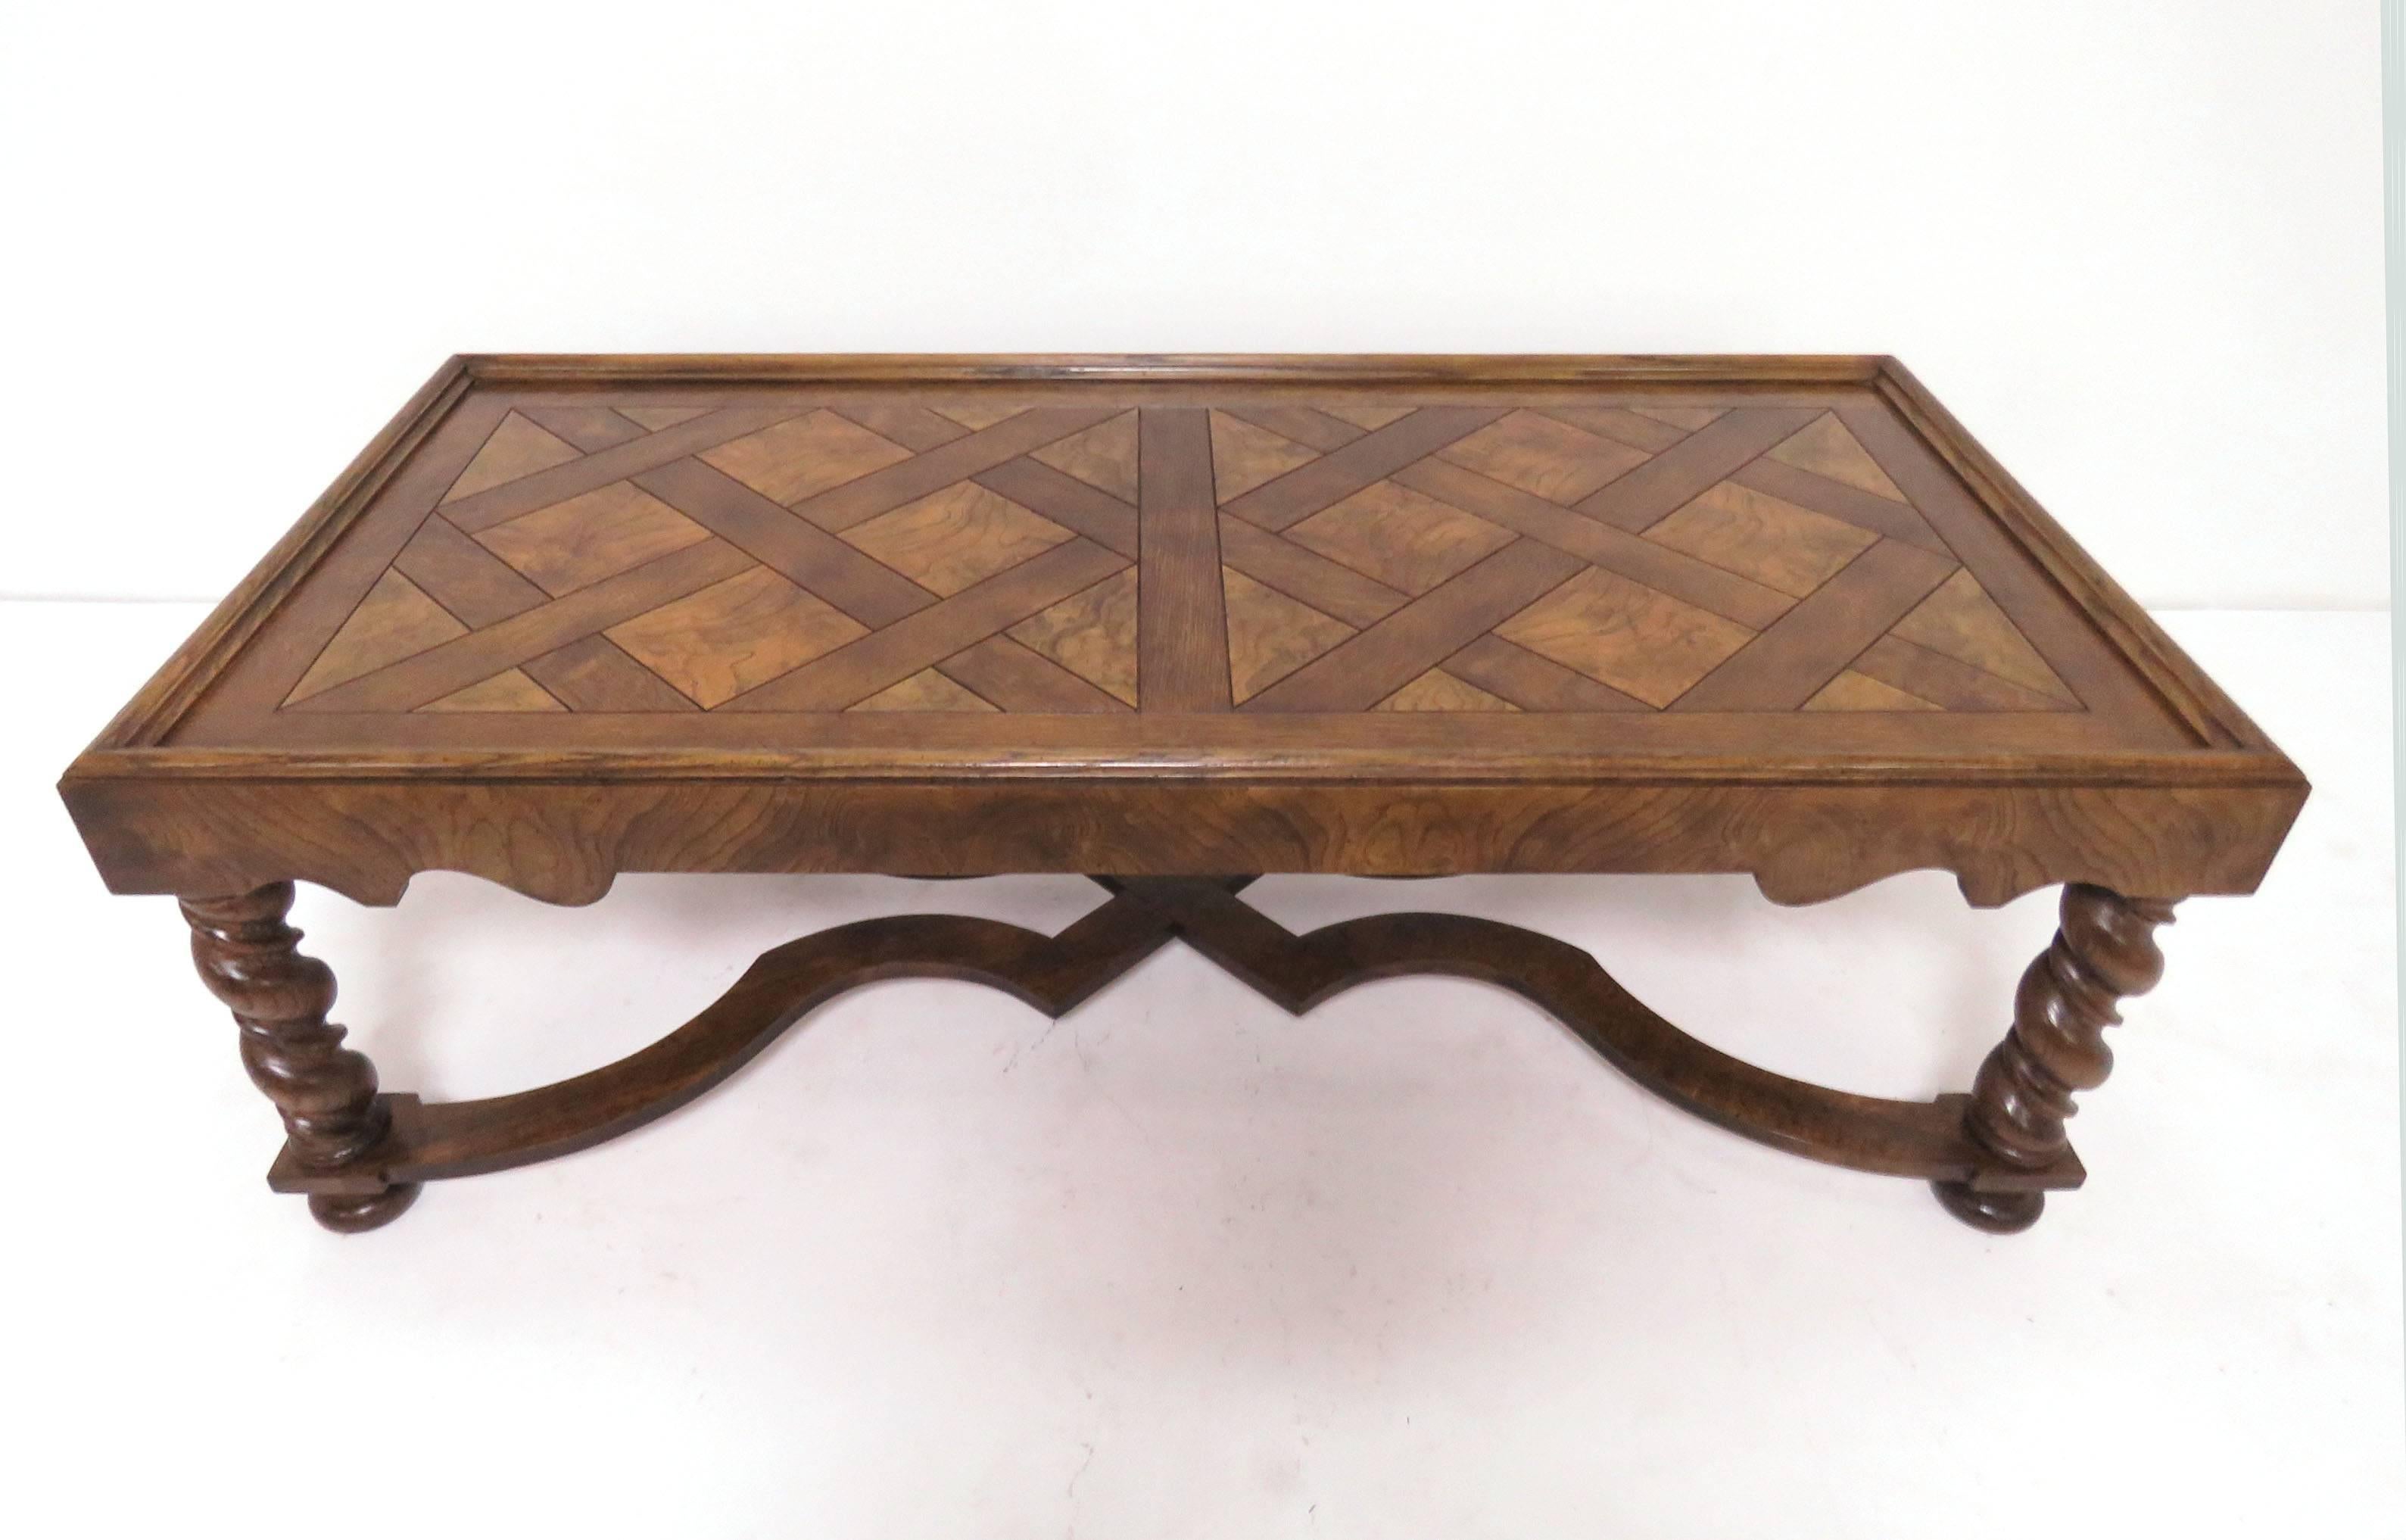 French country style coffee table by Baker Furniture, circa 1960s. Carved legs and saltire stretchers, parquet top in quartersawn oak contrasting with burl elements.